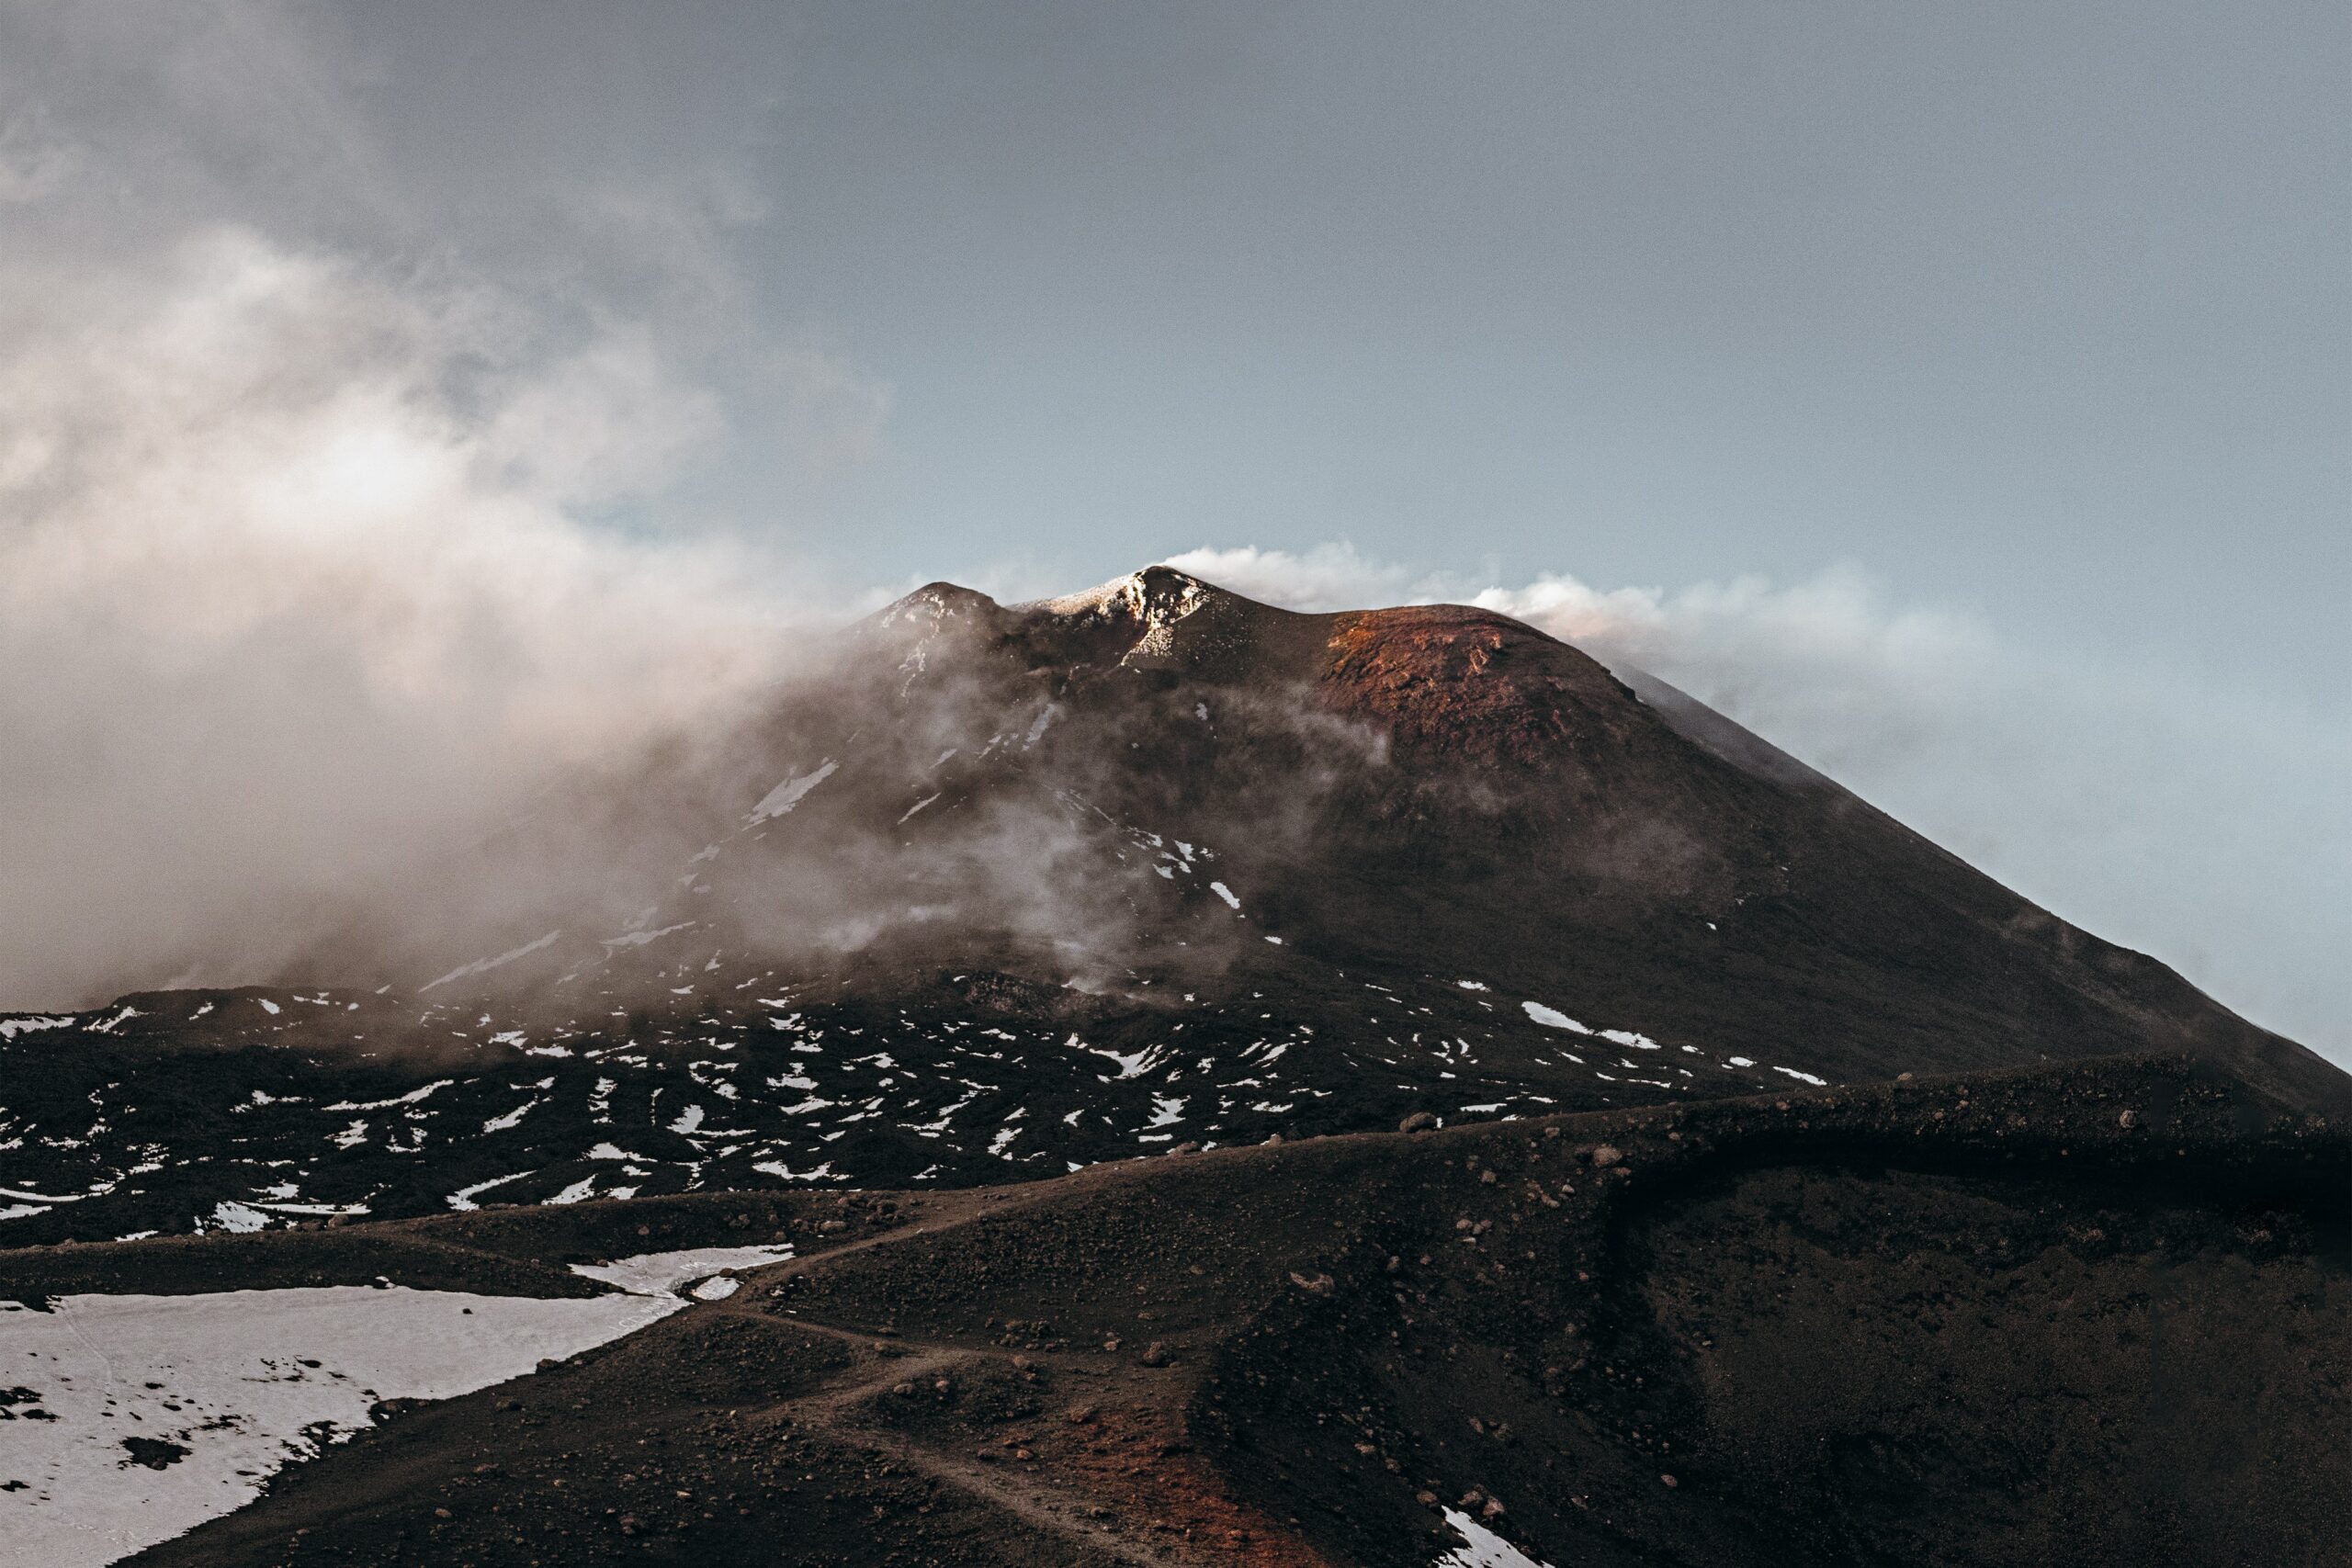 photo taken by Asa Roger showing Etna partially wrapped in smoke and clouds and you can clearly see the lava fields of past eruptions - photo used by Geo Etna Explorer Private and Group Tours Guided Jeep Excursions on Etna and Eastern Sicily